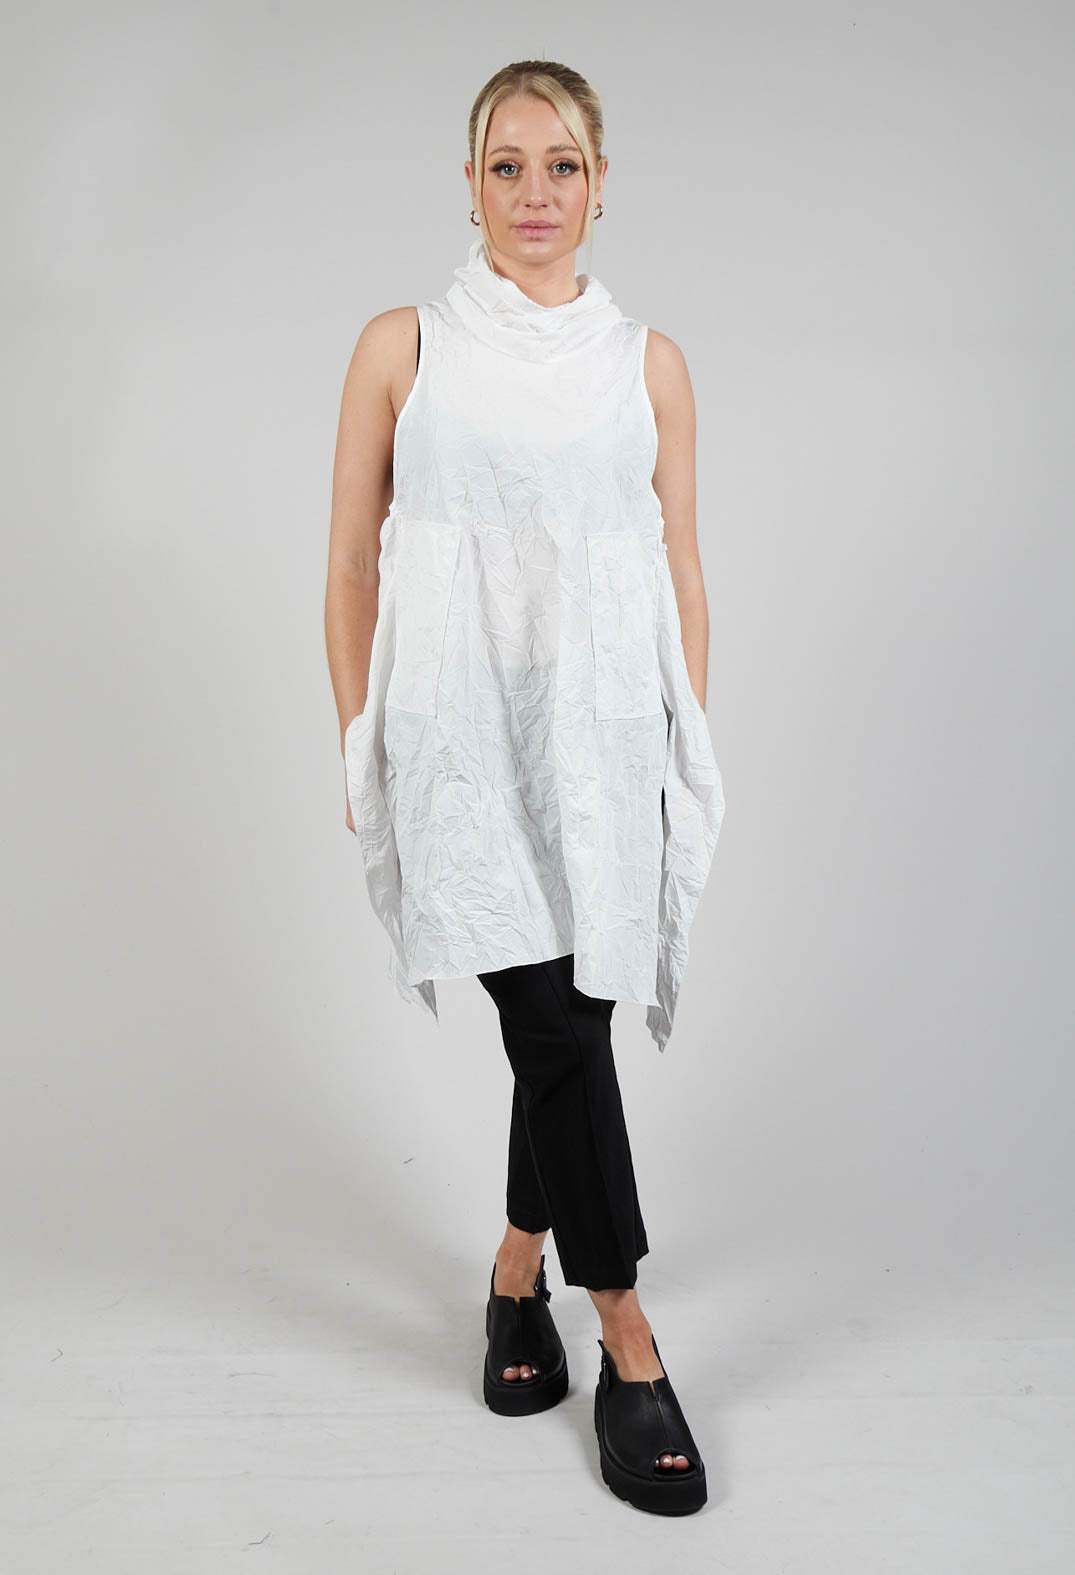 RION Tunic in White